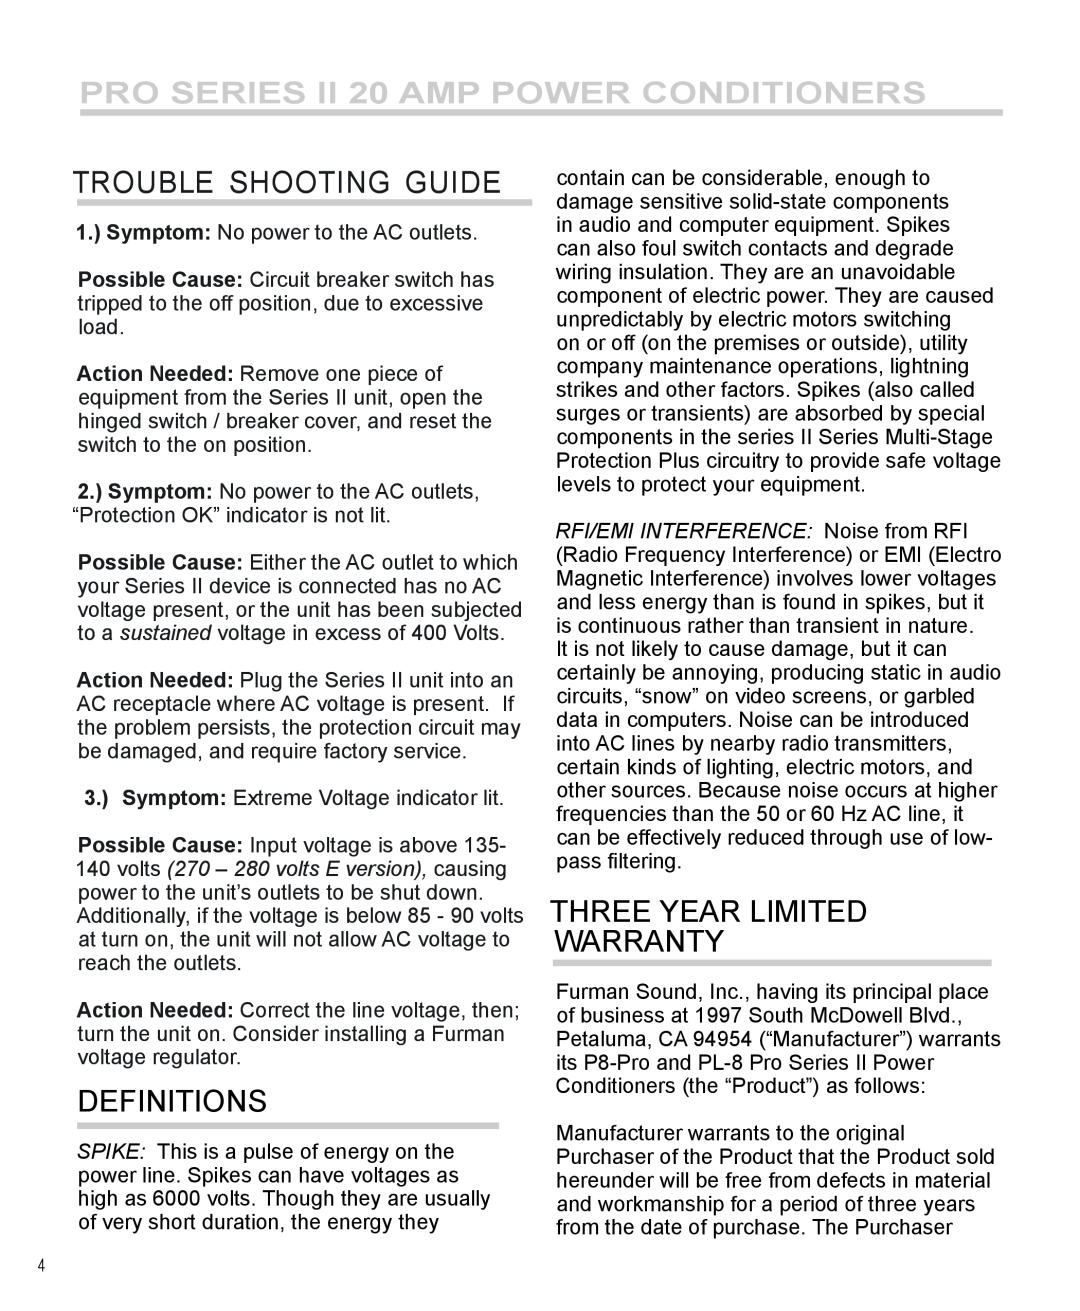 Furman Sound PL-8 PRO II, P-8 PRO II manual Troubl E Shooting Guide, Definitions, Three Year Limited Warranty 